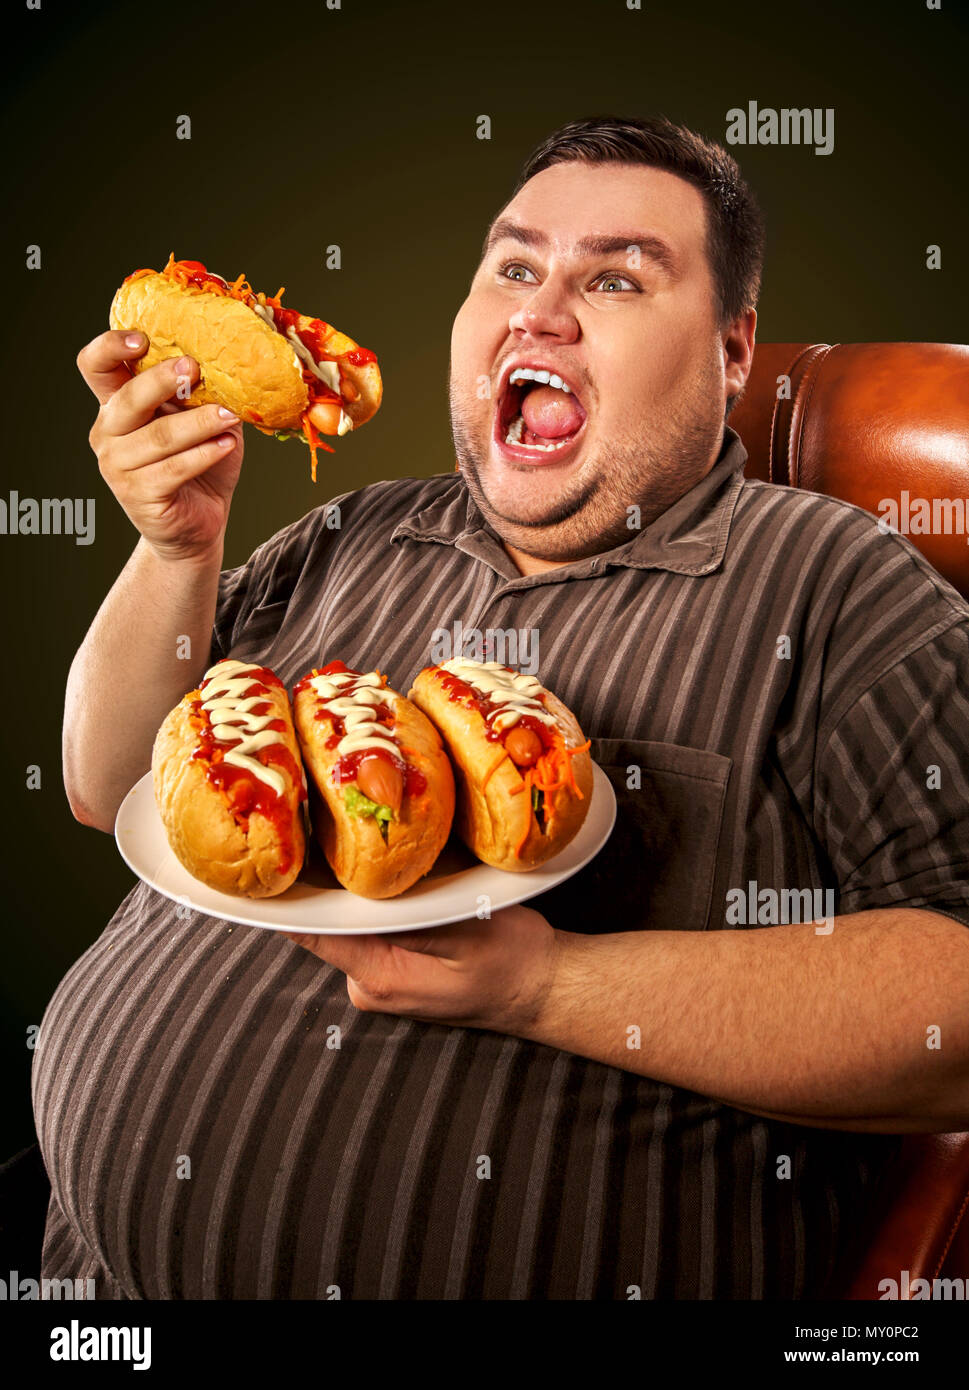 Fat man eating fast food hot dog. Breakfast for overweight person. Stock Photo